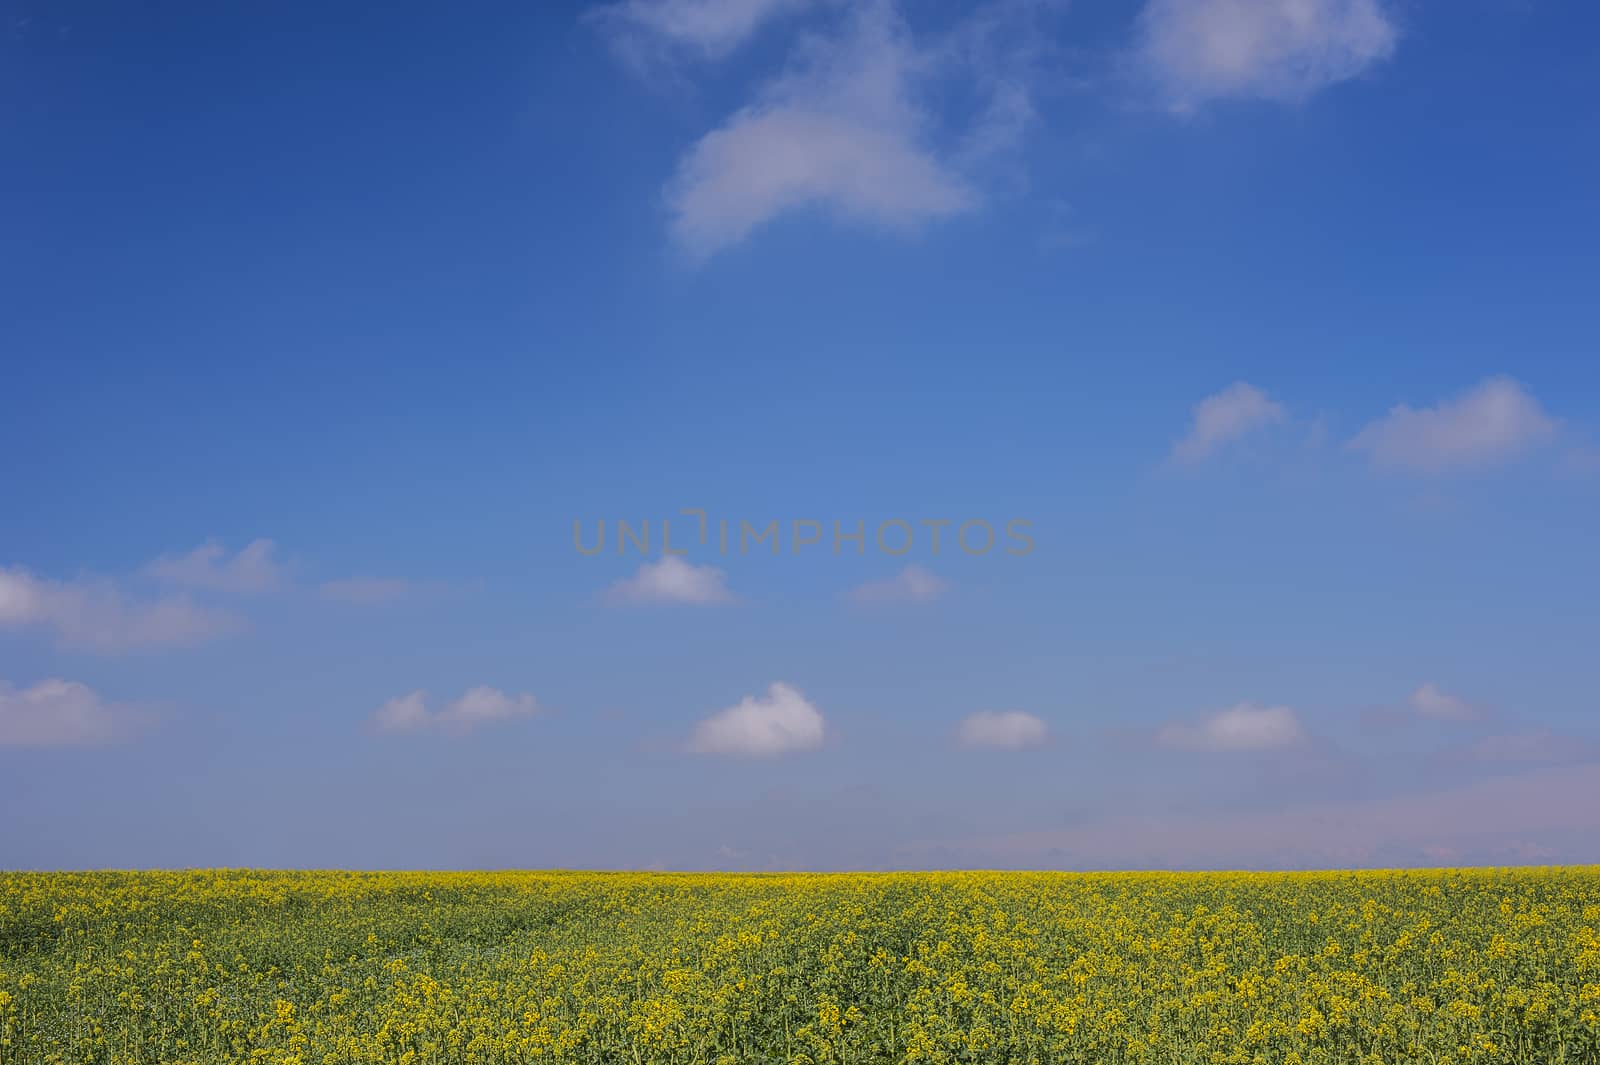 Country Field with Green Grass, Yellow Plants and Blue Sky